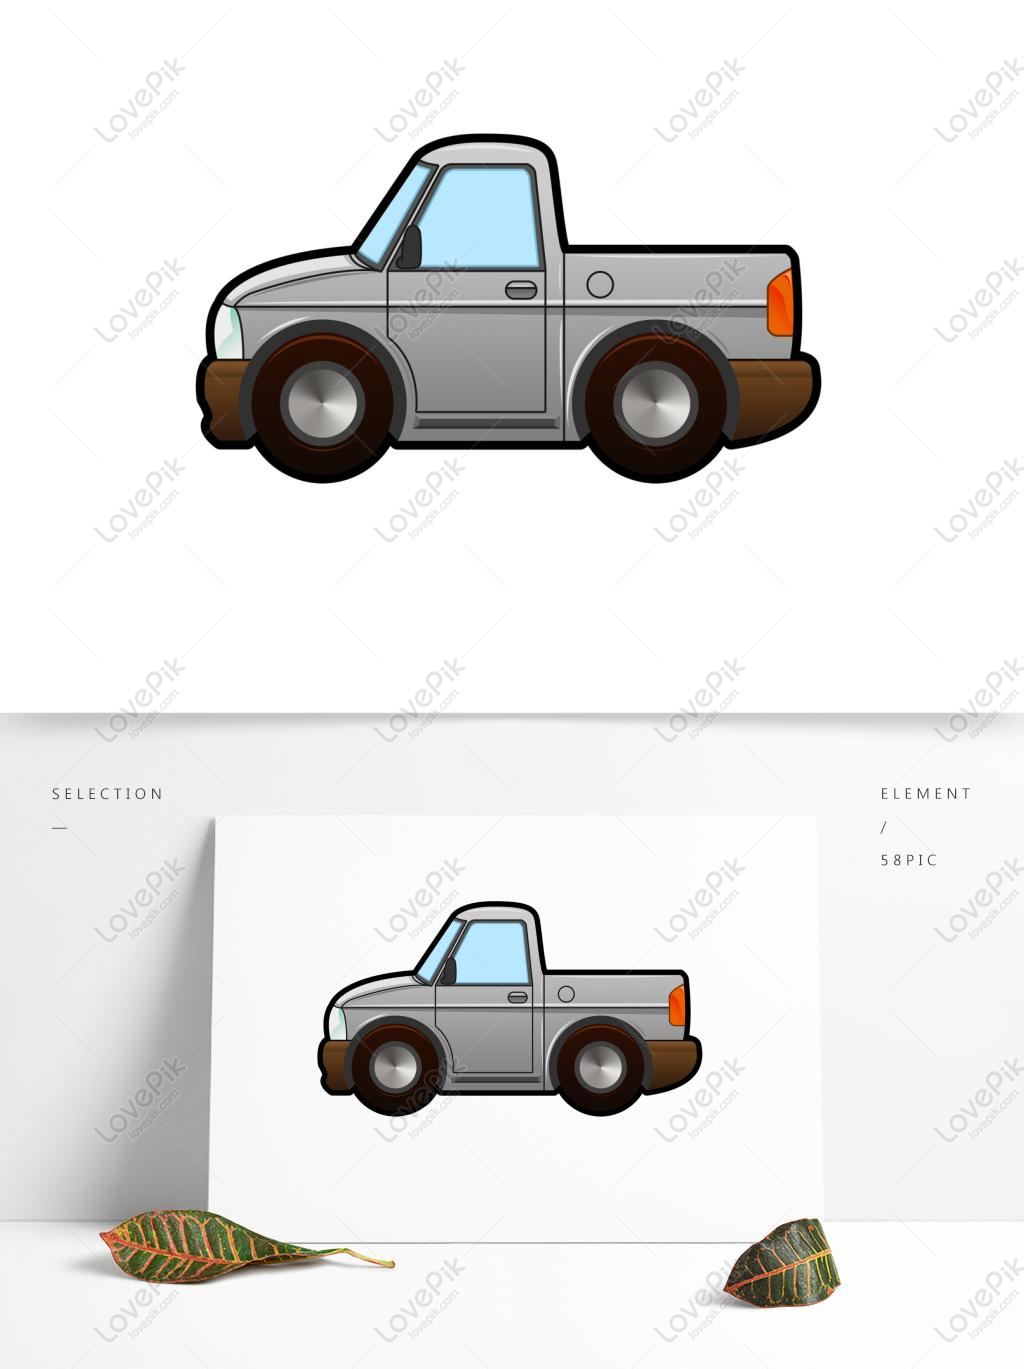 Cartoon Pickup Truck Can Be Used For Commercial Materials PNG Transparent  Background TIF images free download_1369 × 1024 px - Lovepik